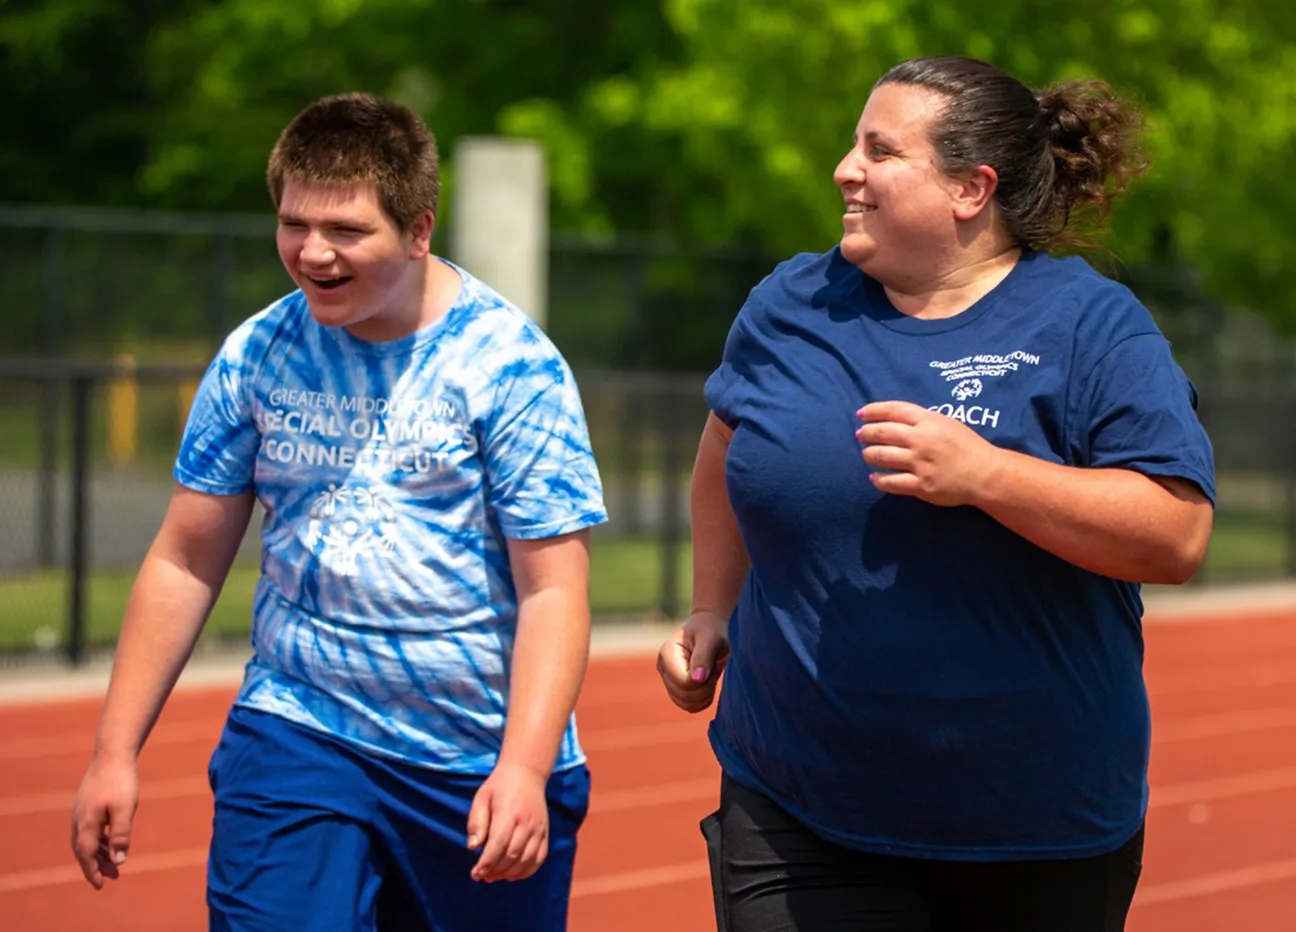 Coach and athlete running side-by-side wearing blue t-shirts on a track.